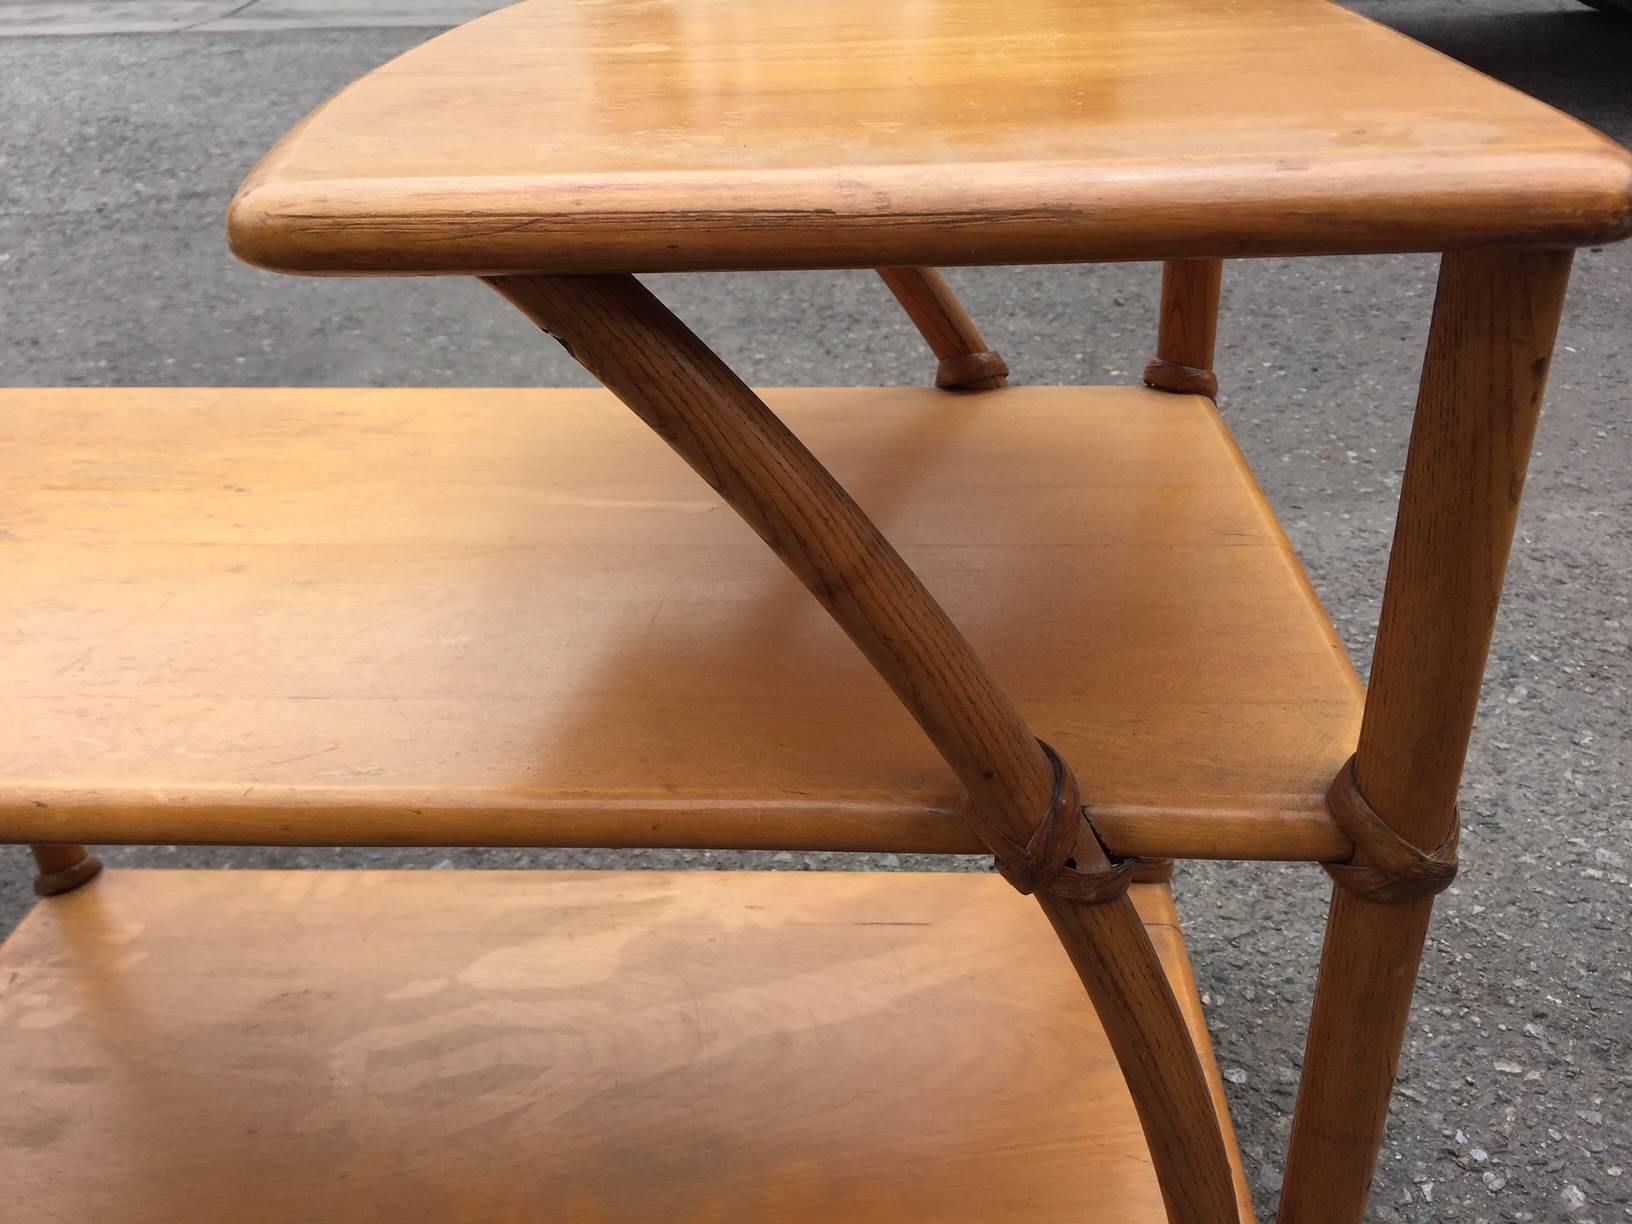 Pair of Vintage Heywood-Wakefield Side Tables, American, Mid-20th Century In Excellent Condition For Sale In West Hollywood, CA